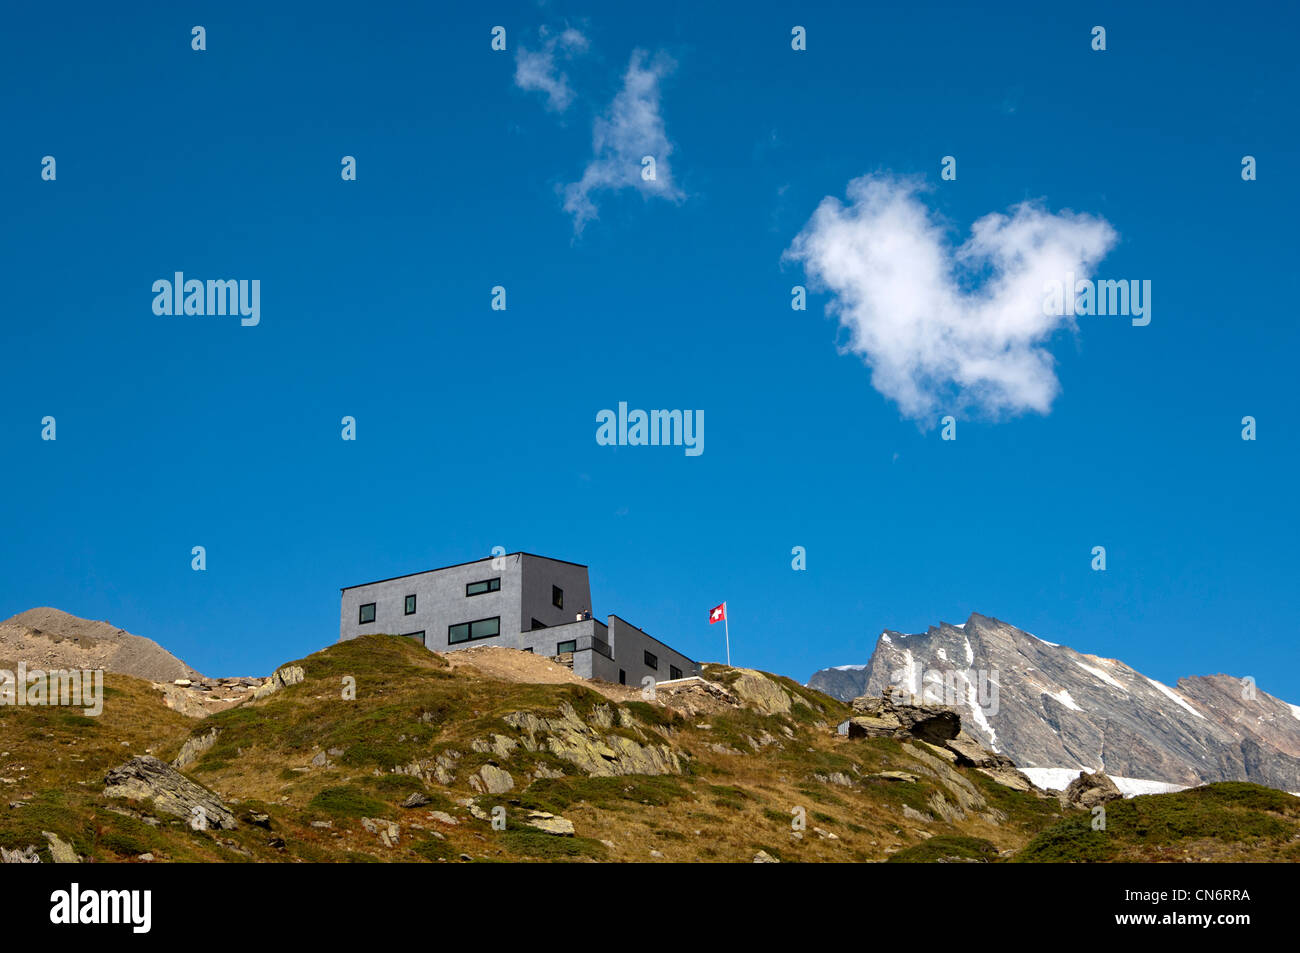 The modern mountain shelter Anenhuette in the valley Loetschental, Valais, Switzerland Stock Photo